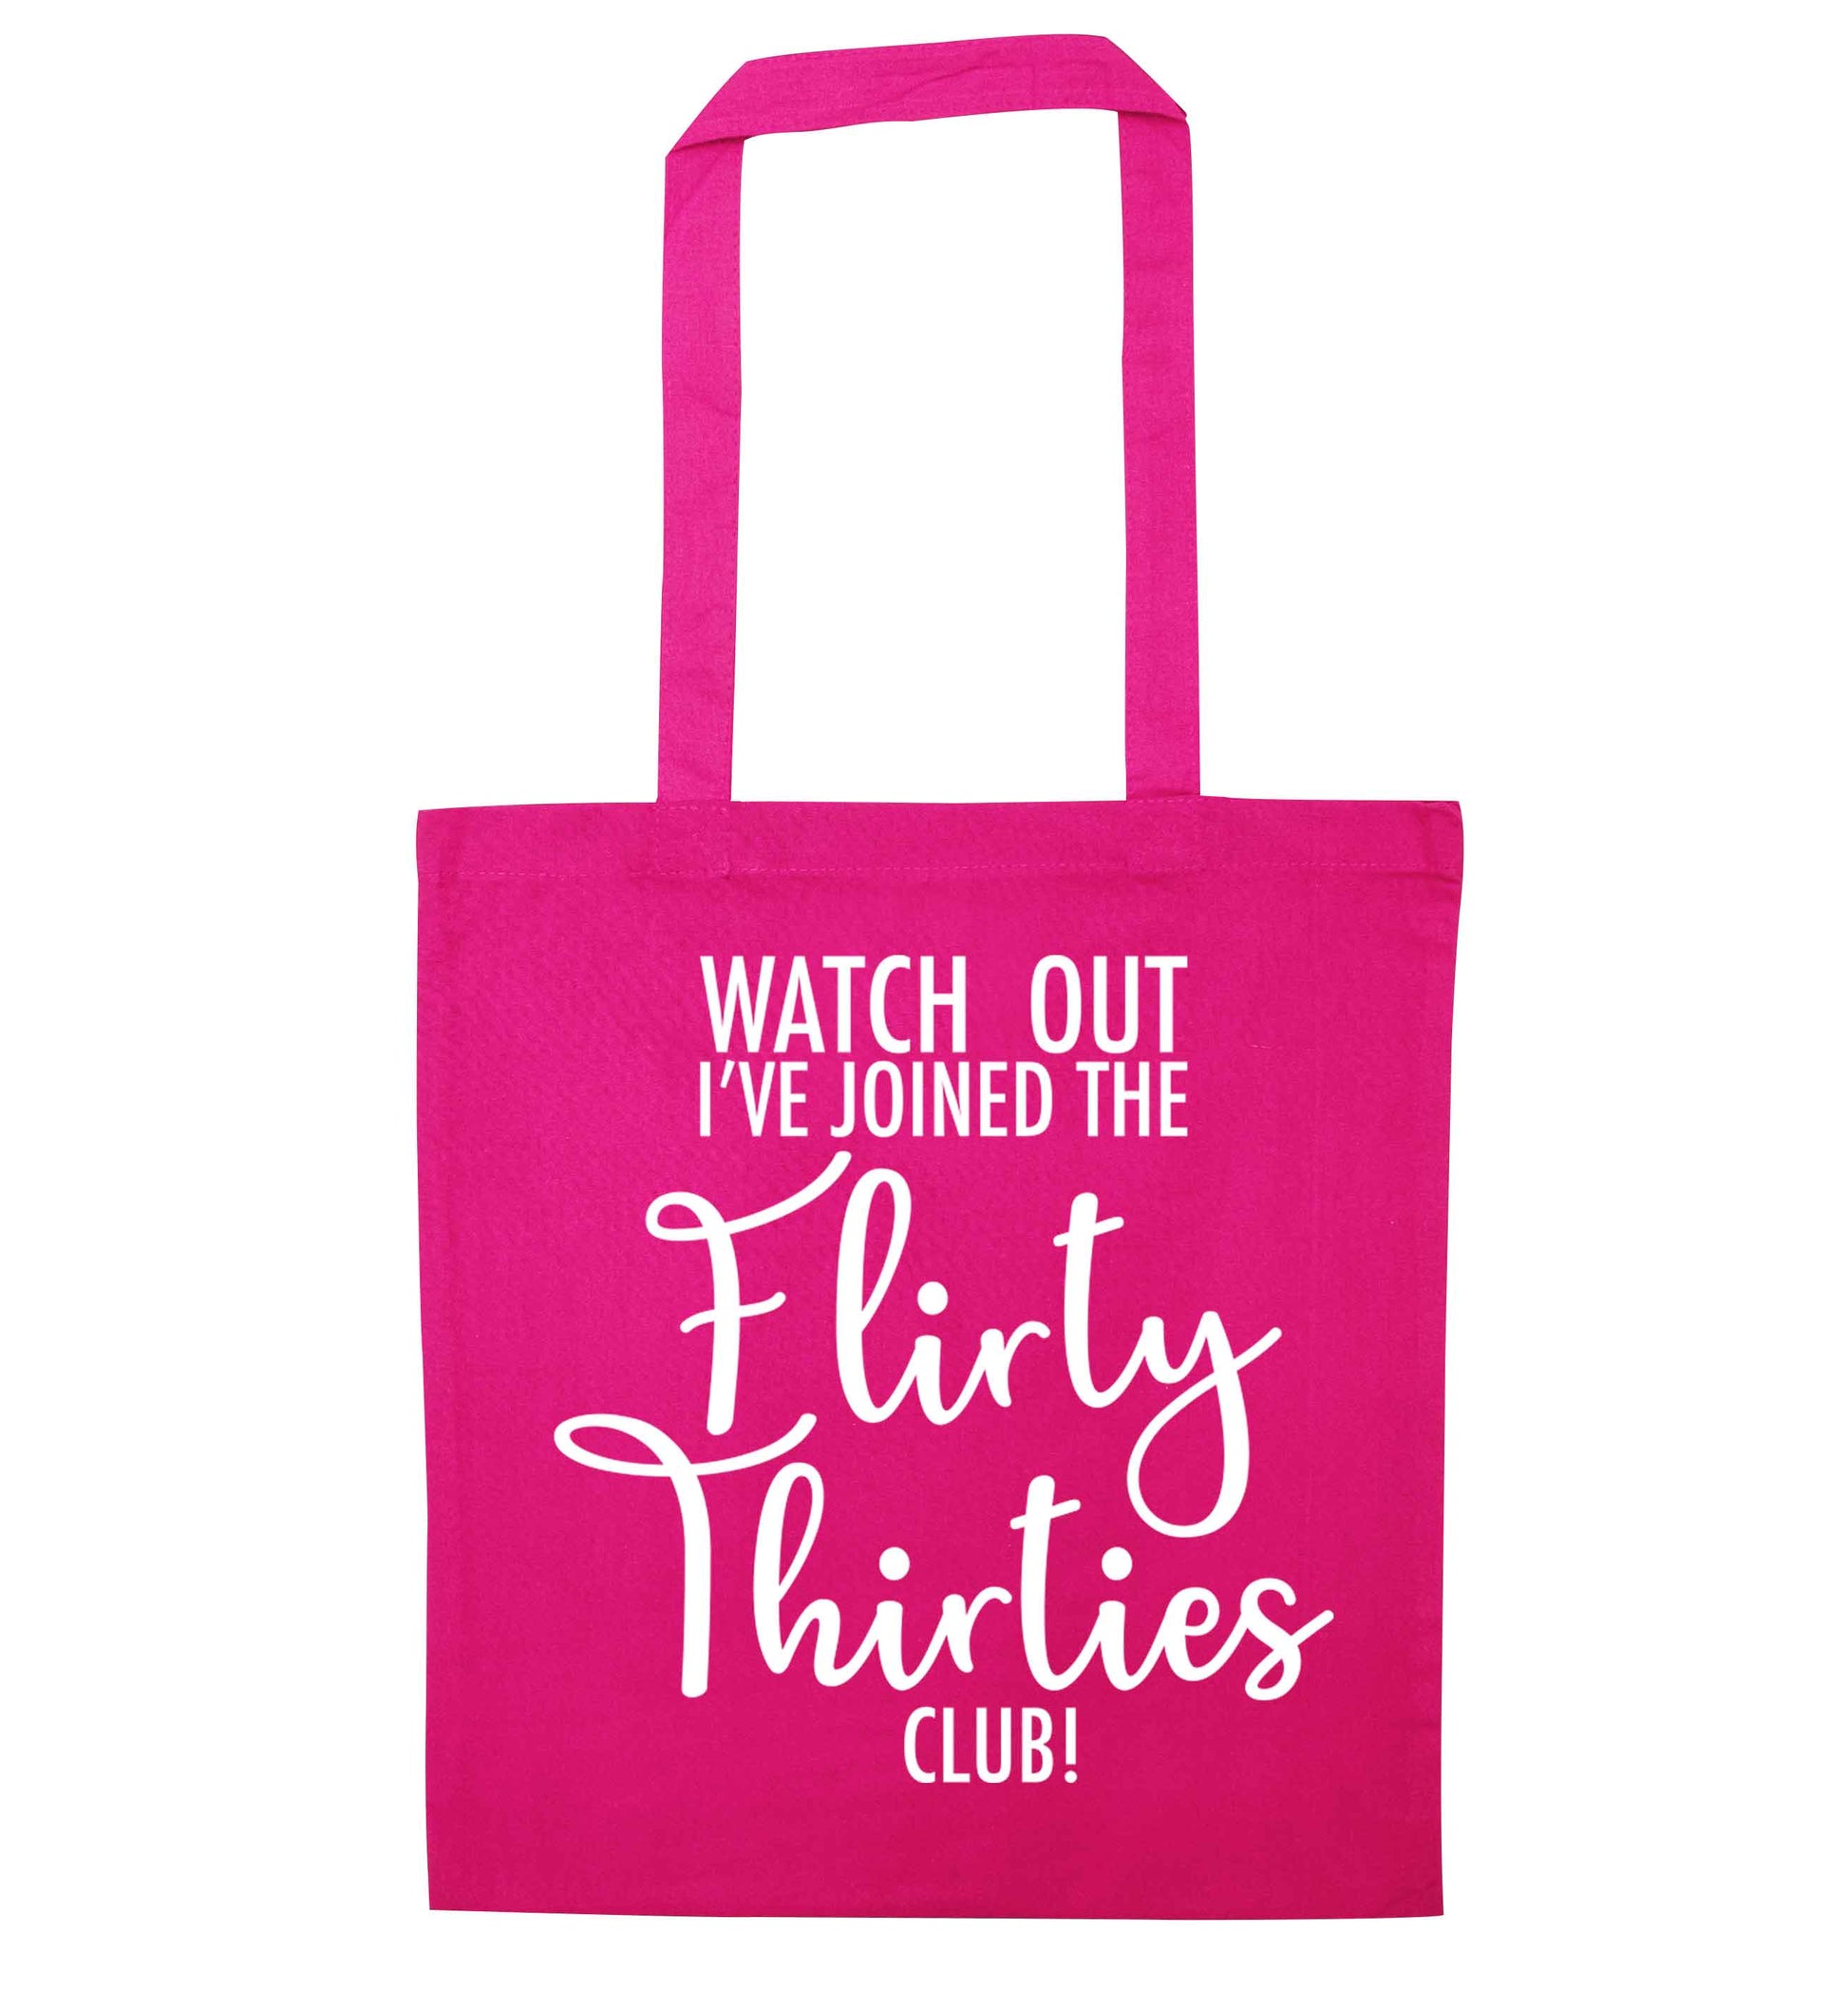 Watch out I've joined the flirty thirties club pink tote bag